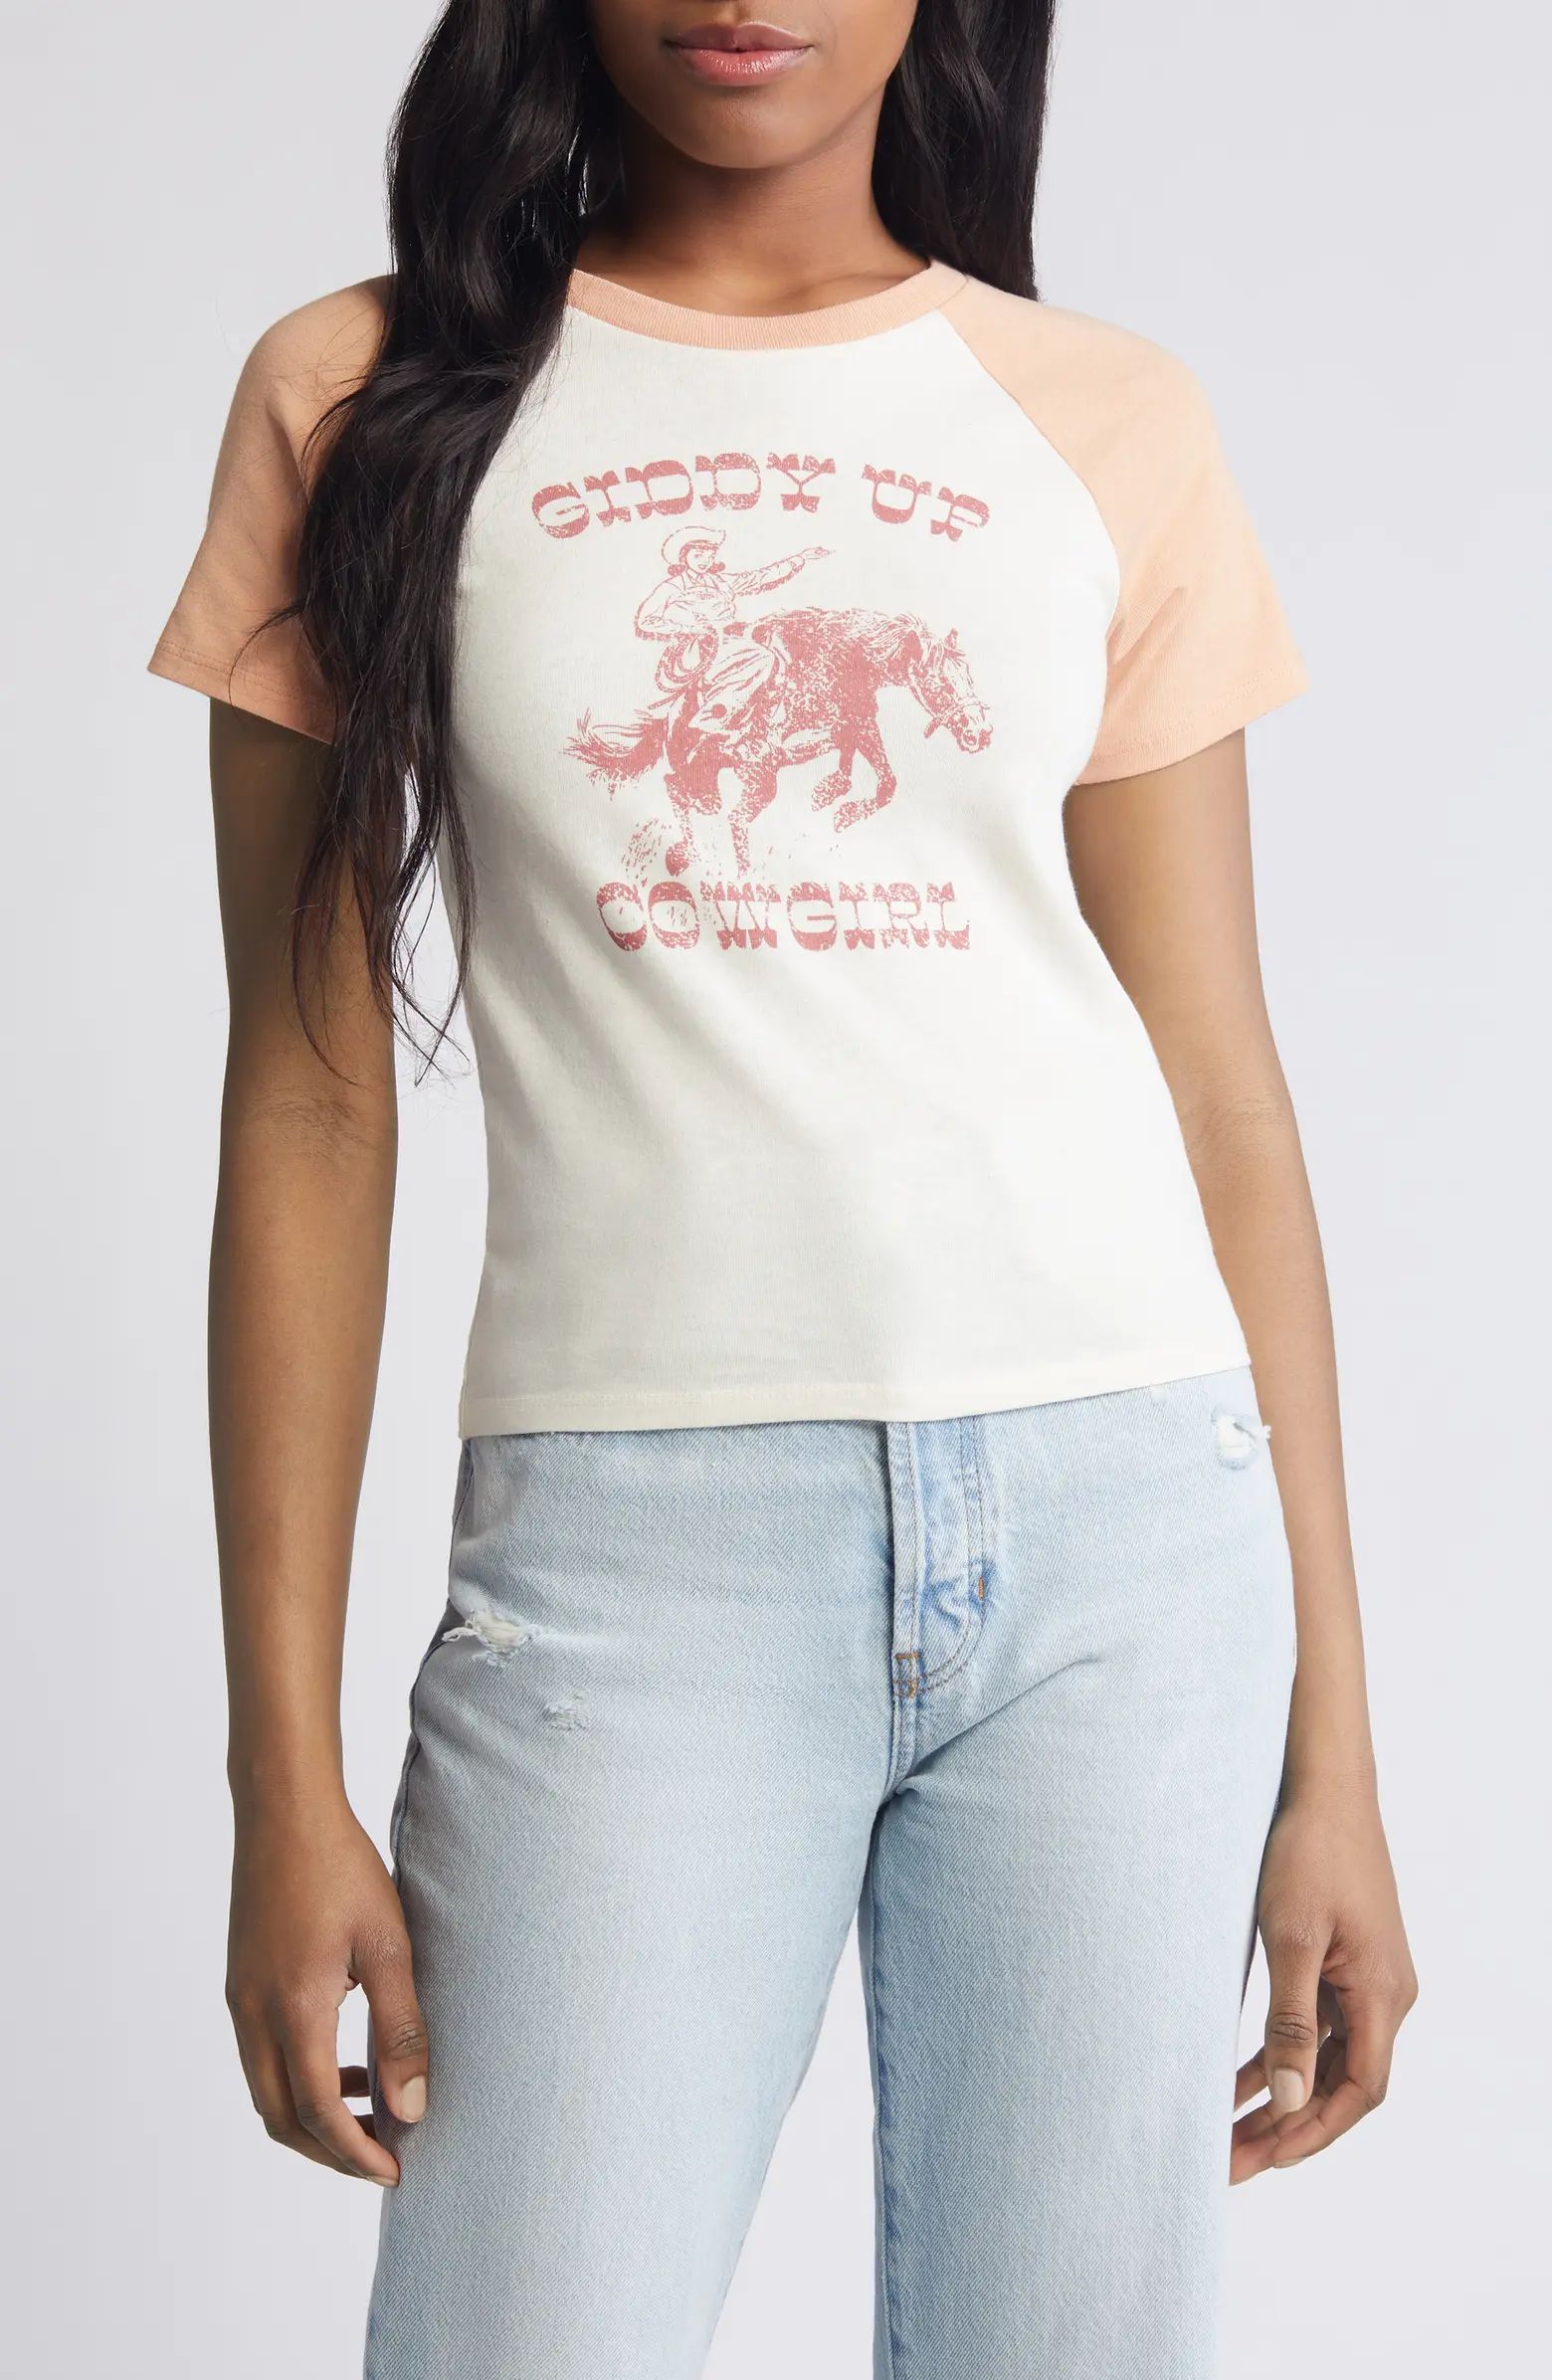 Giddy Up Cowgirl Graphic T-Shirt | Nordstrom